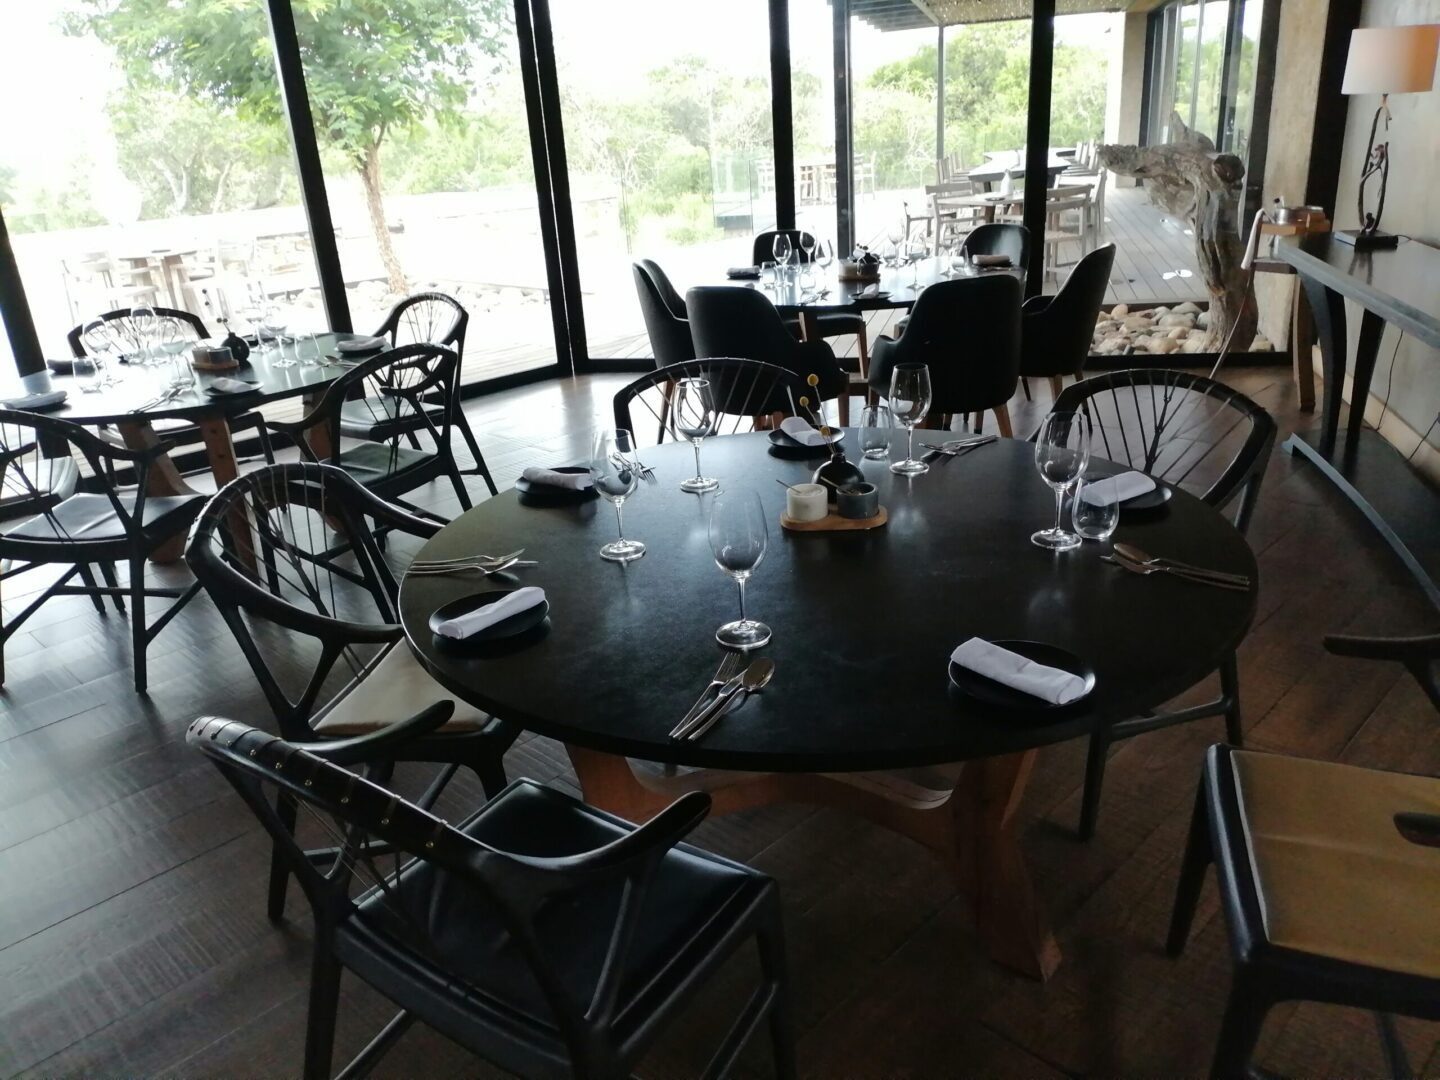 A restaurant with tables and chairs set up for dinner.